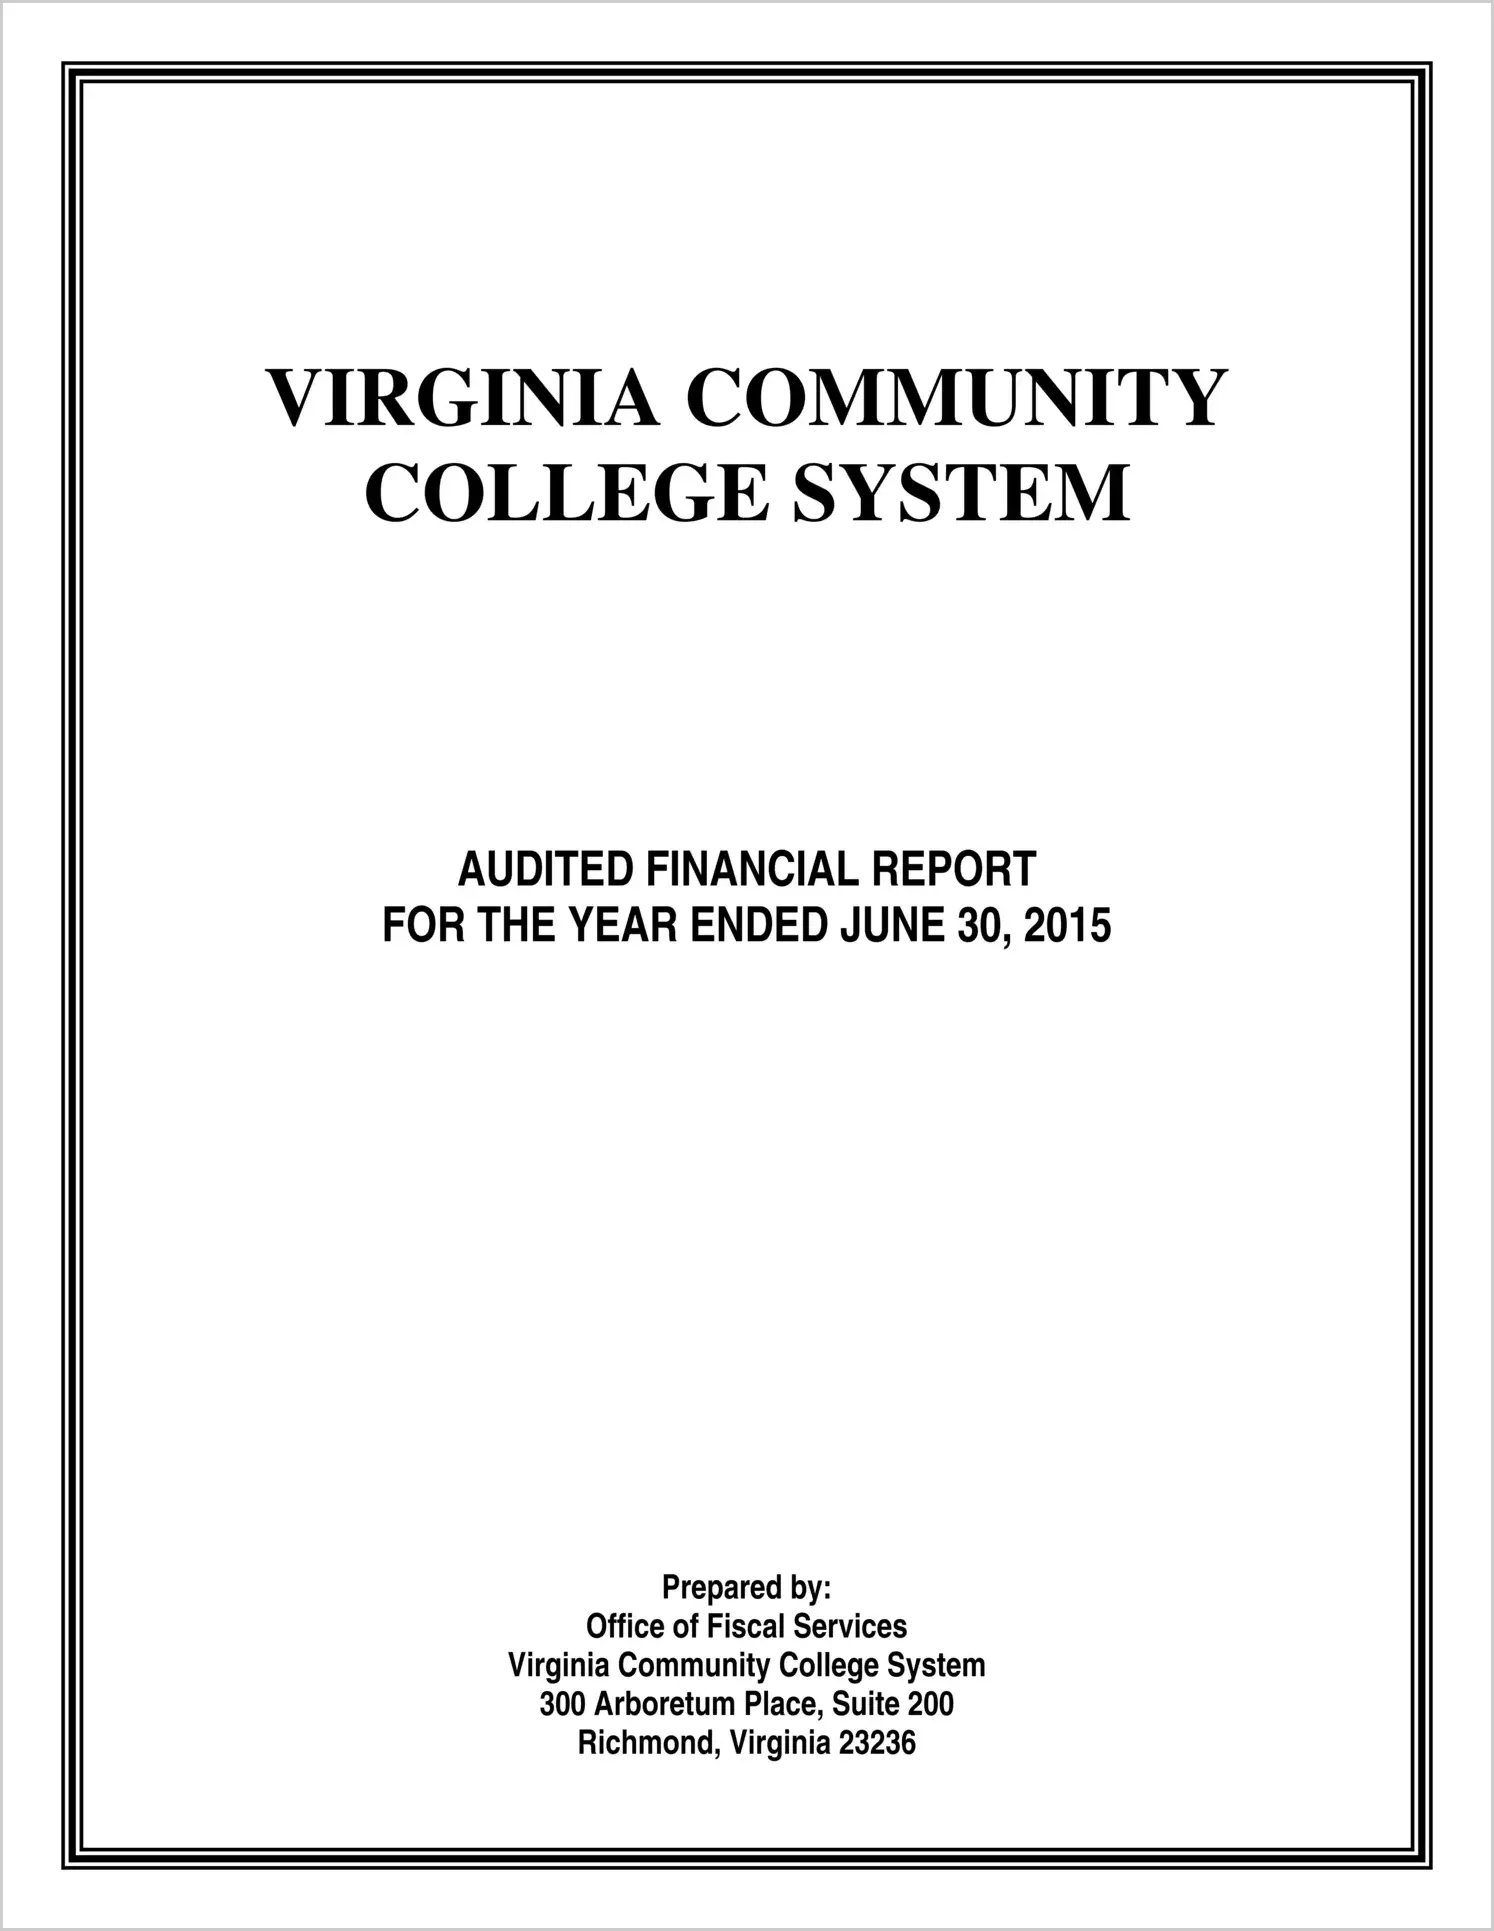 Virginia Community College System Financial Statement for the year ended June 30, 2015